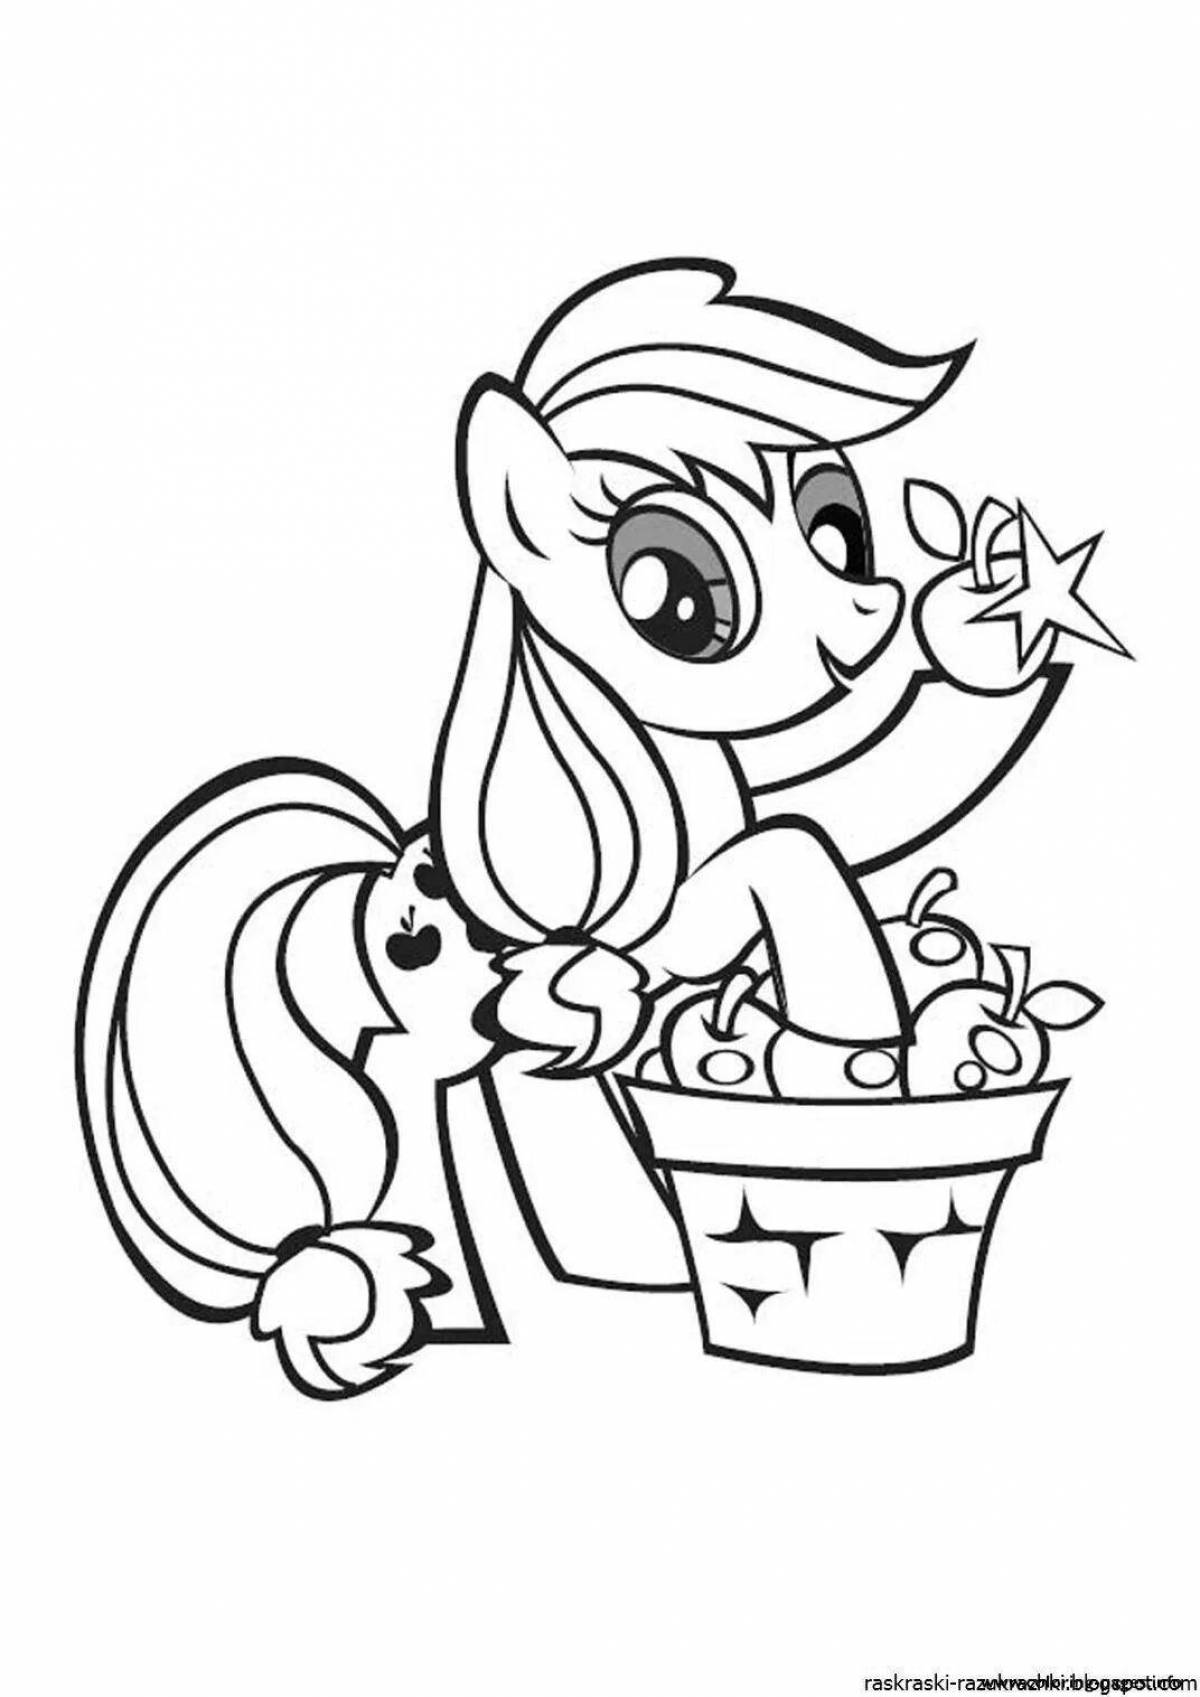 Fantastic pony coloring for girls 4-5 years old